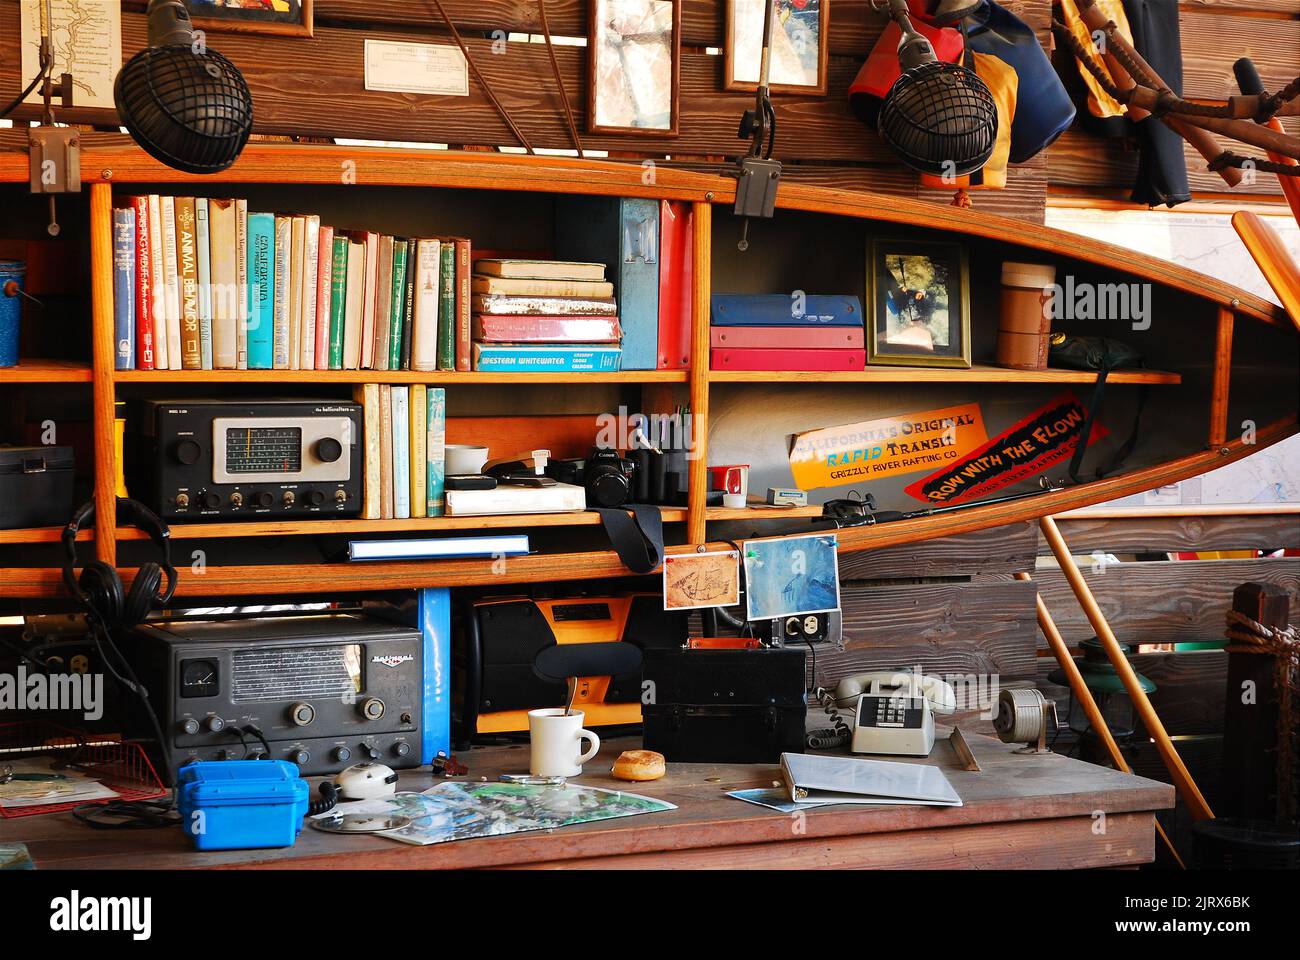 A radio and books are placed on shelves made out of an old canoe in the workplace office of an outdoor adventure tour company in California Stock Photo